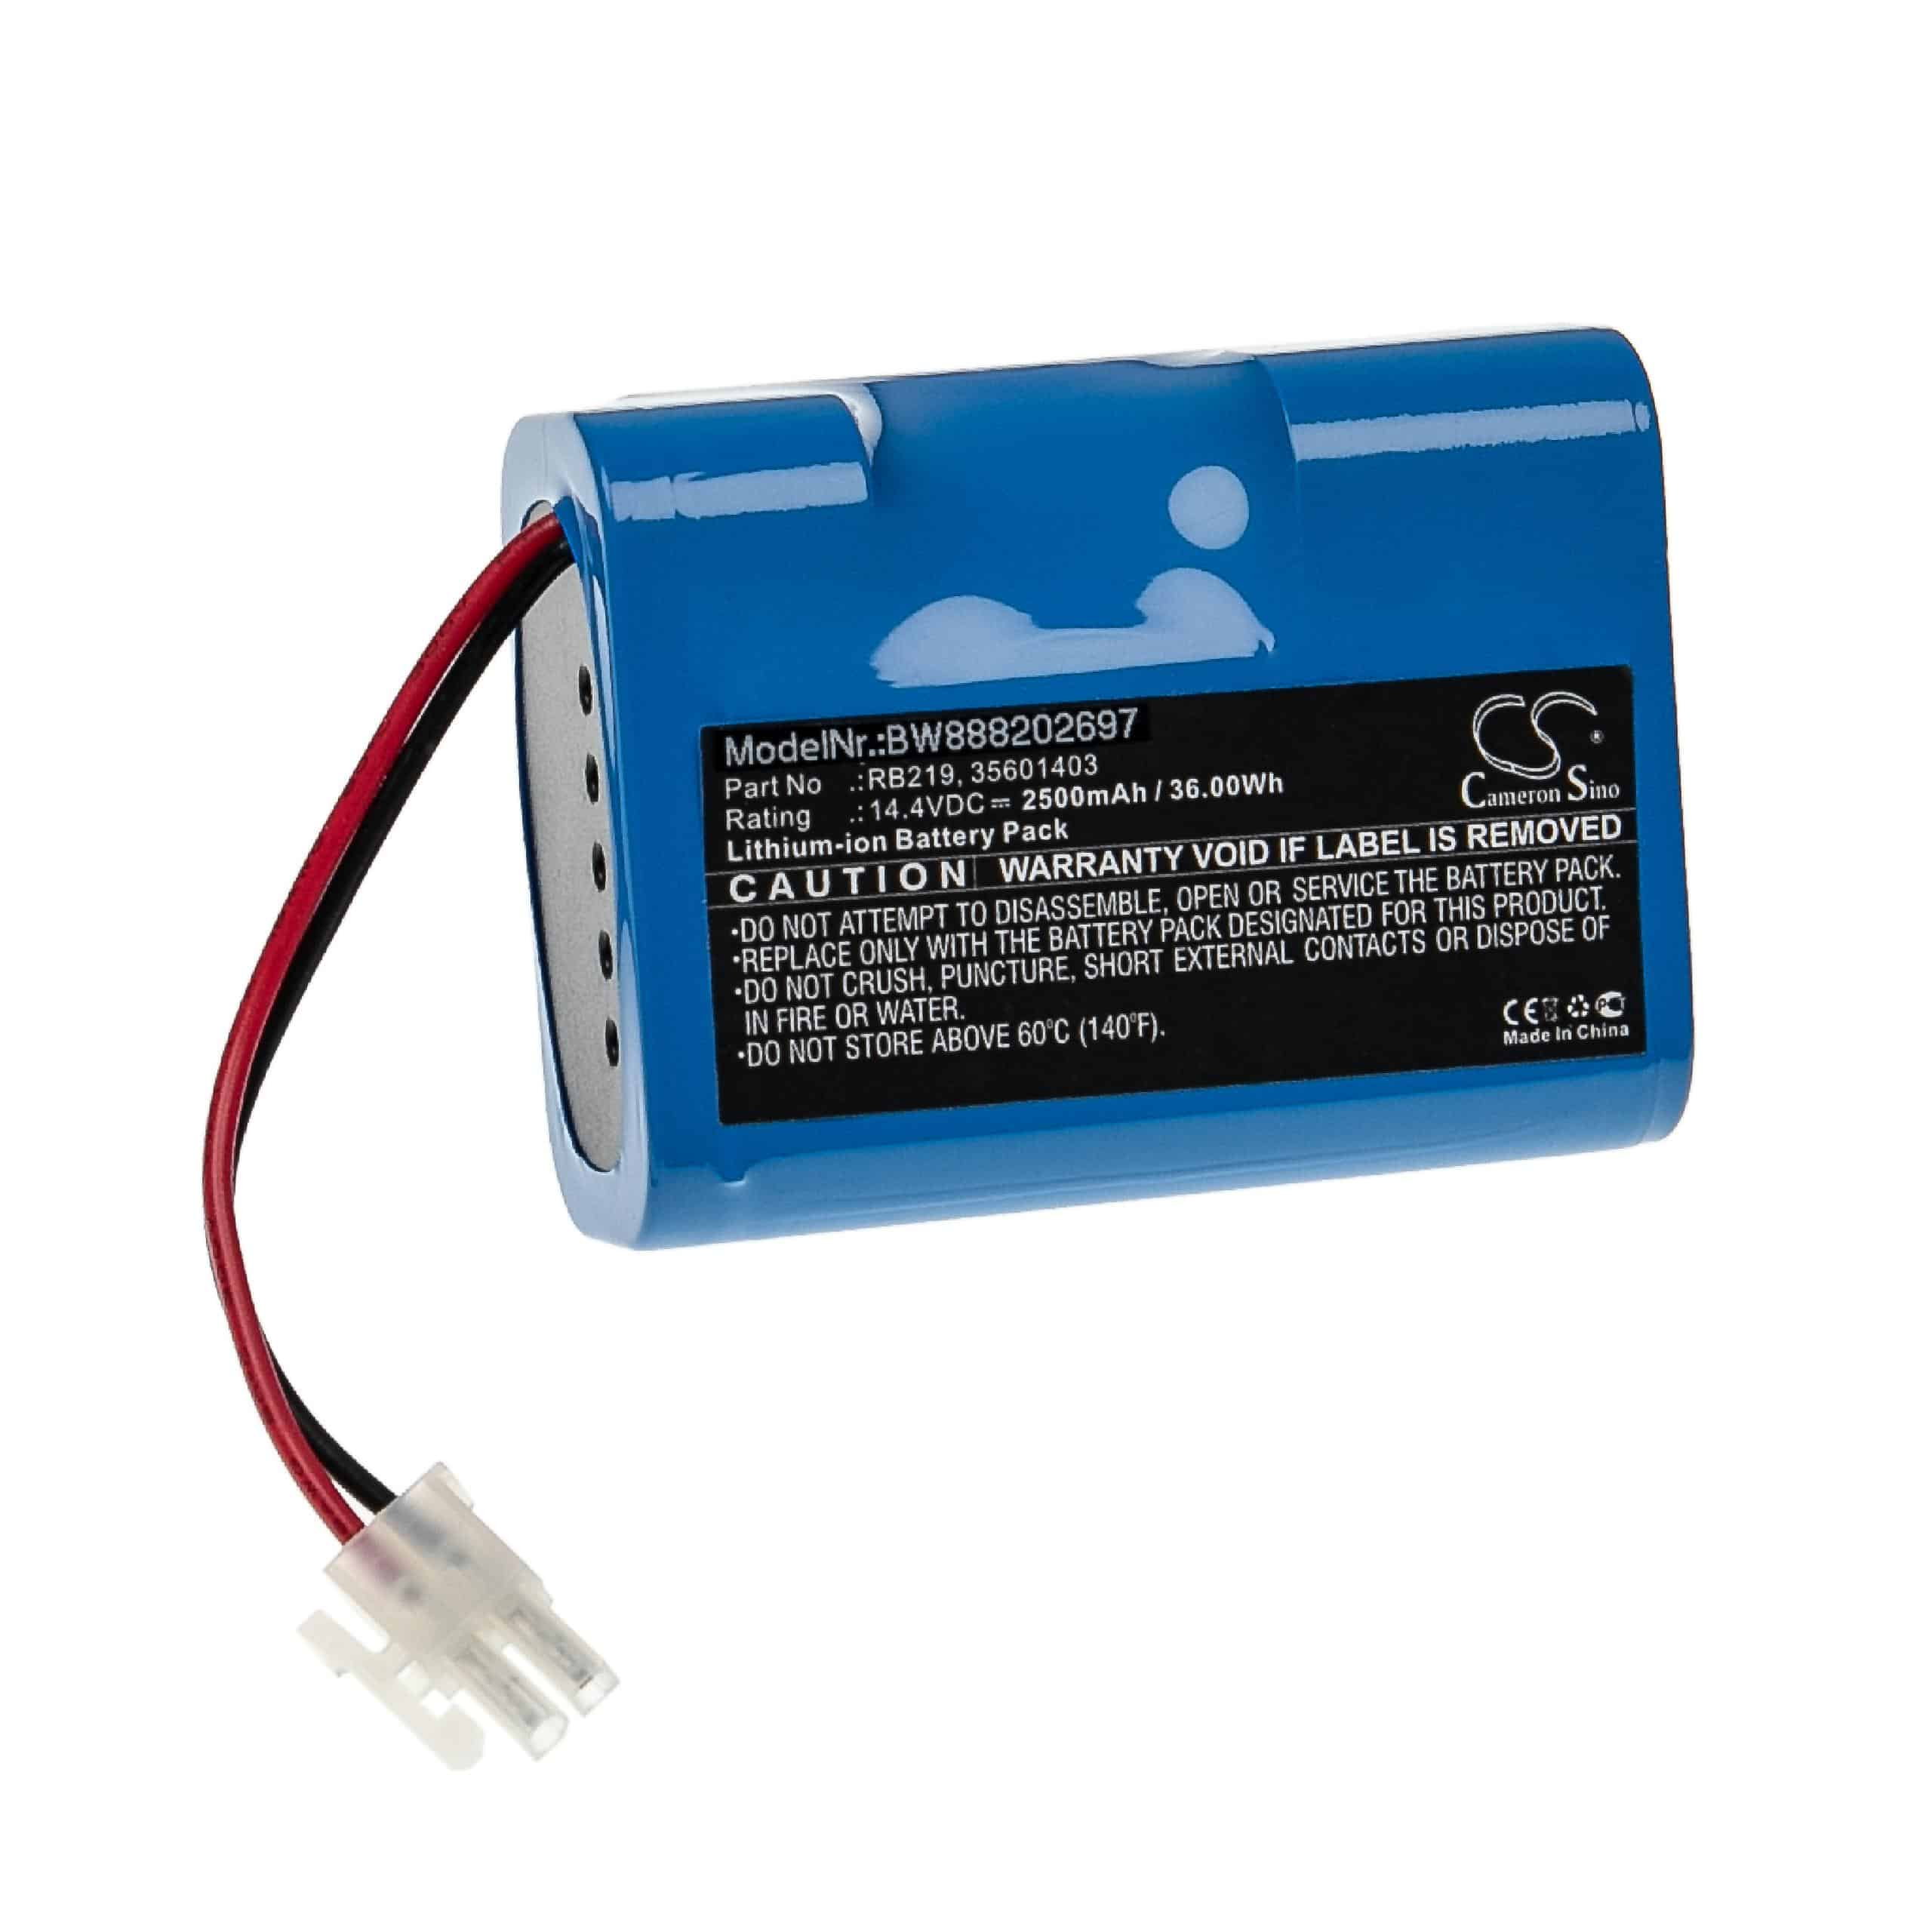 Battery Replacement for Hoover 35601727, 35601403, RB219, Li-RB226 for - 2500mAh, 14.4V, Li-Ion